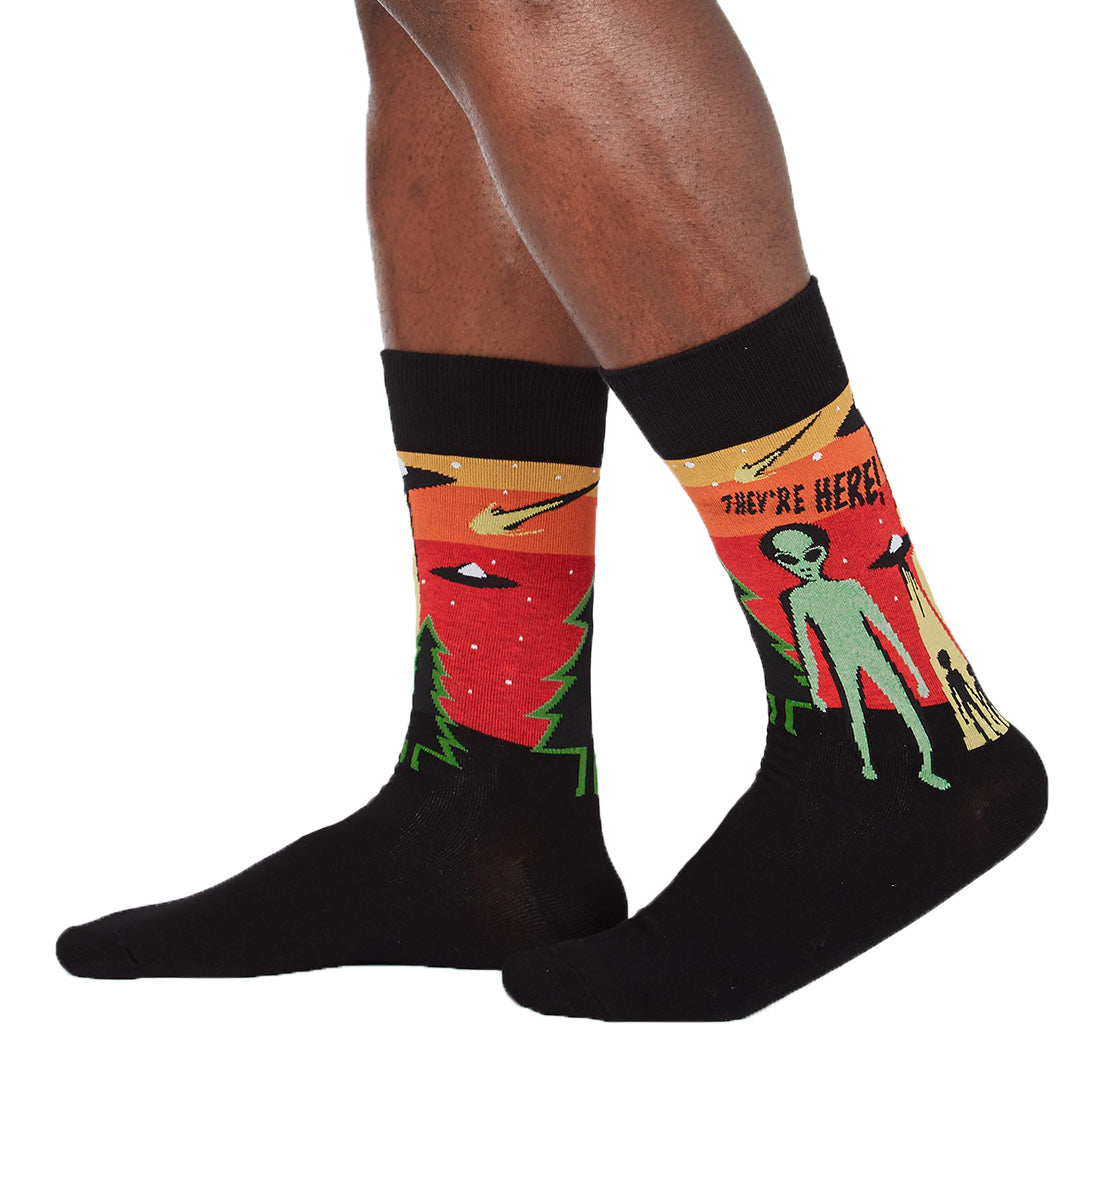 SOCK it to me Men&#39;s Crew Socks (mef0385),They&#39;re Here - They&#39;re Here,One Size